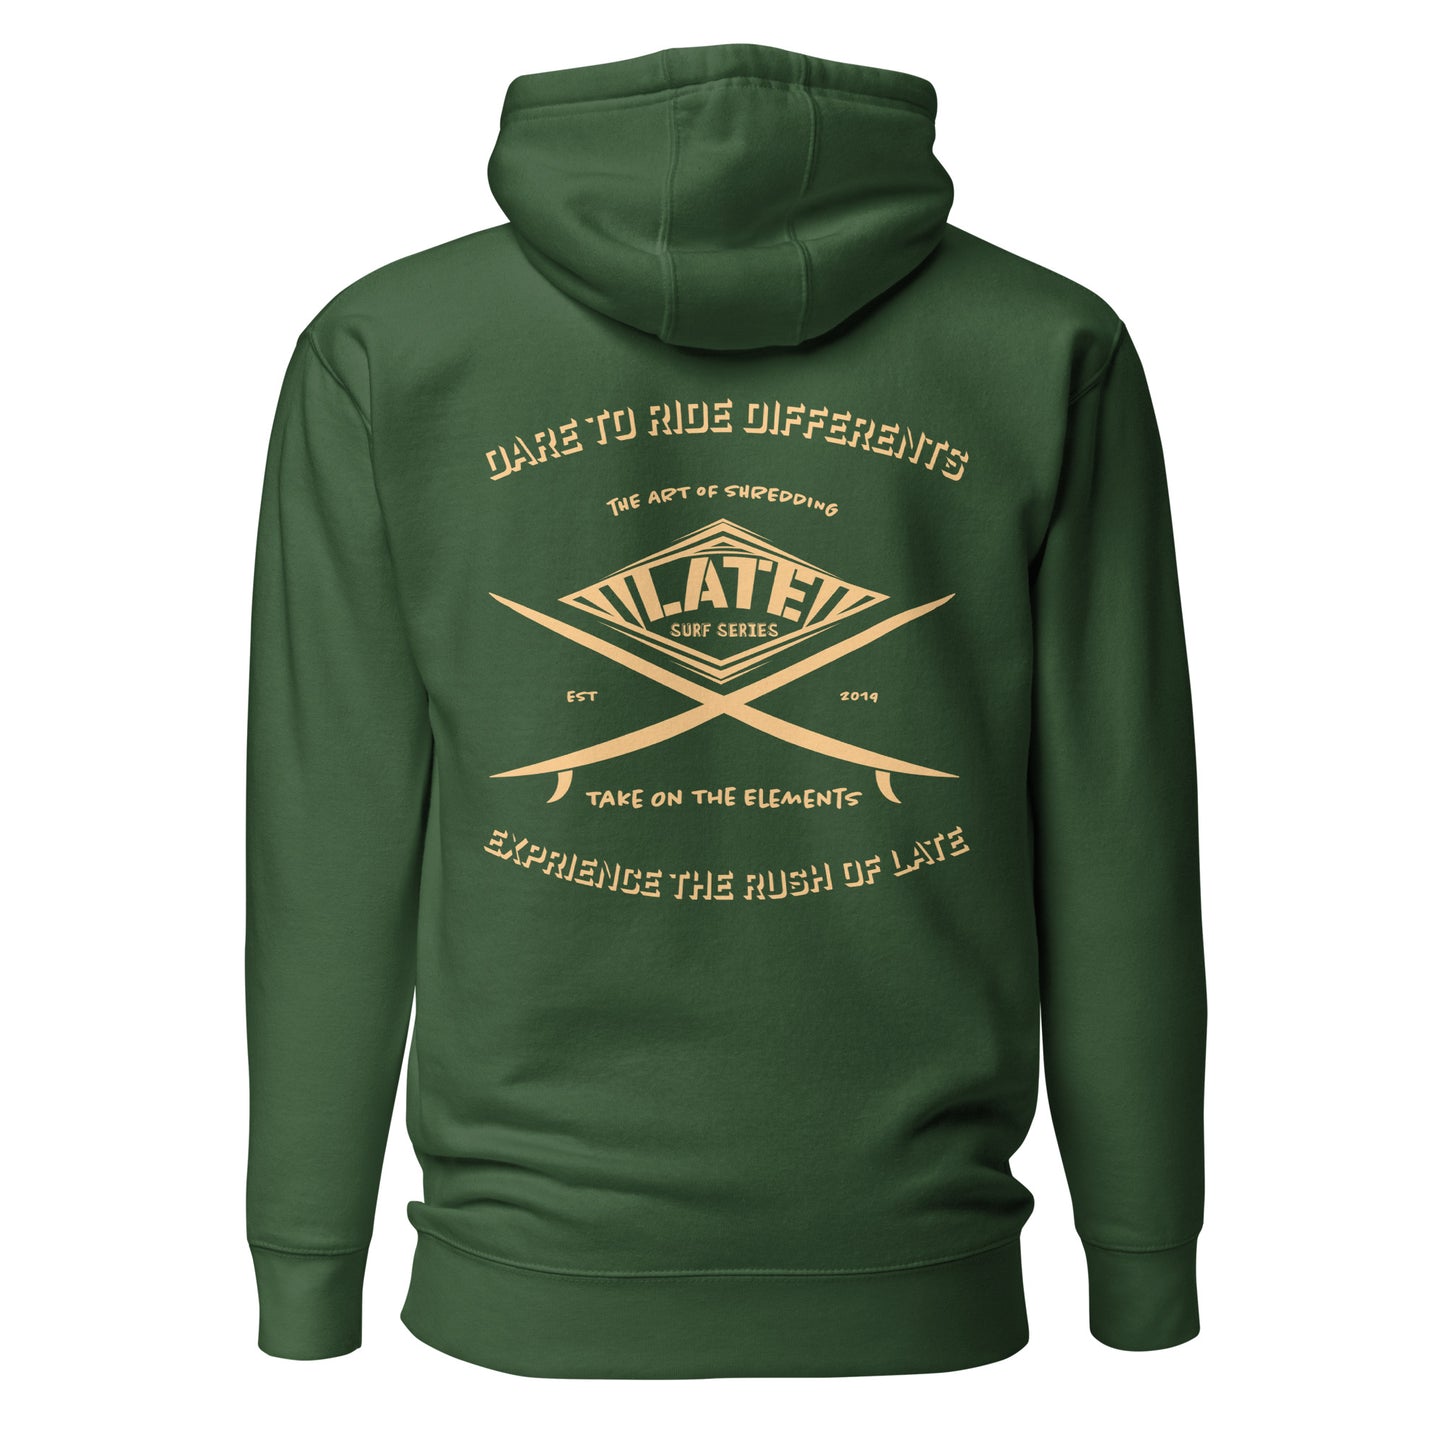 Hoodie surf vert dare to ride differents / the art of shredding / take on the elements / Logo Late surf series